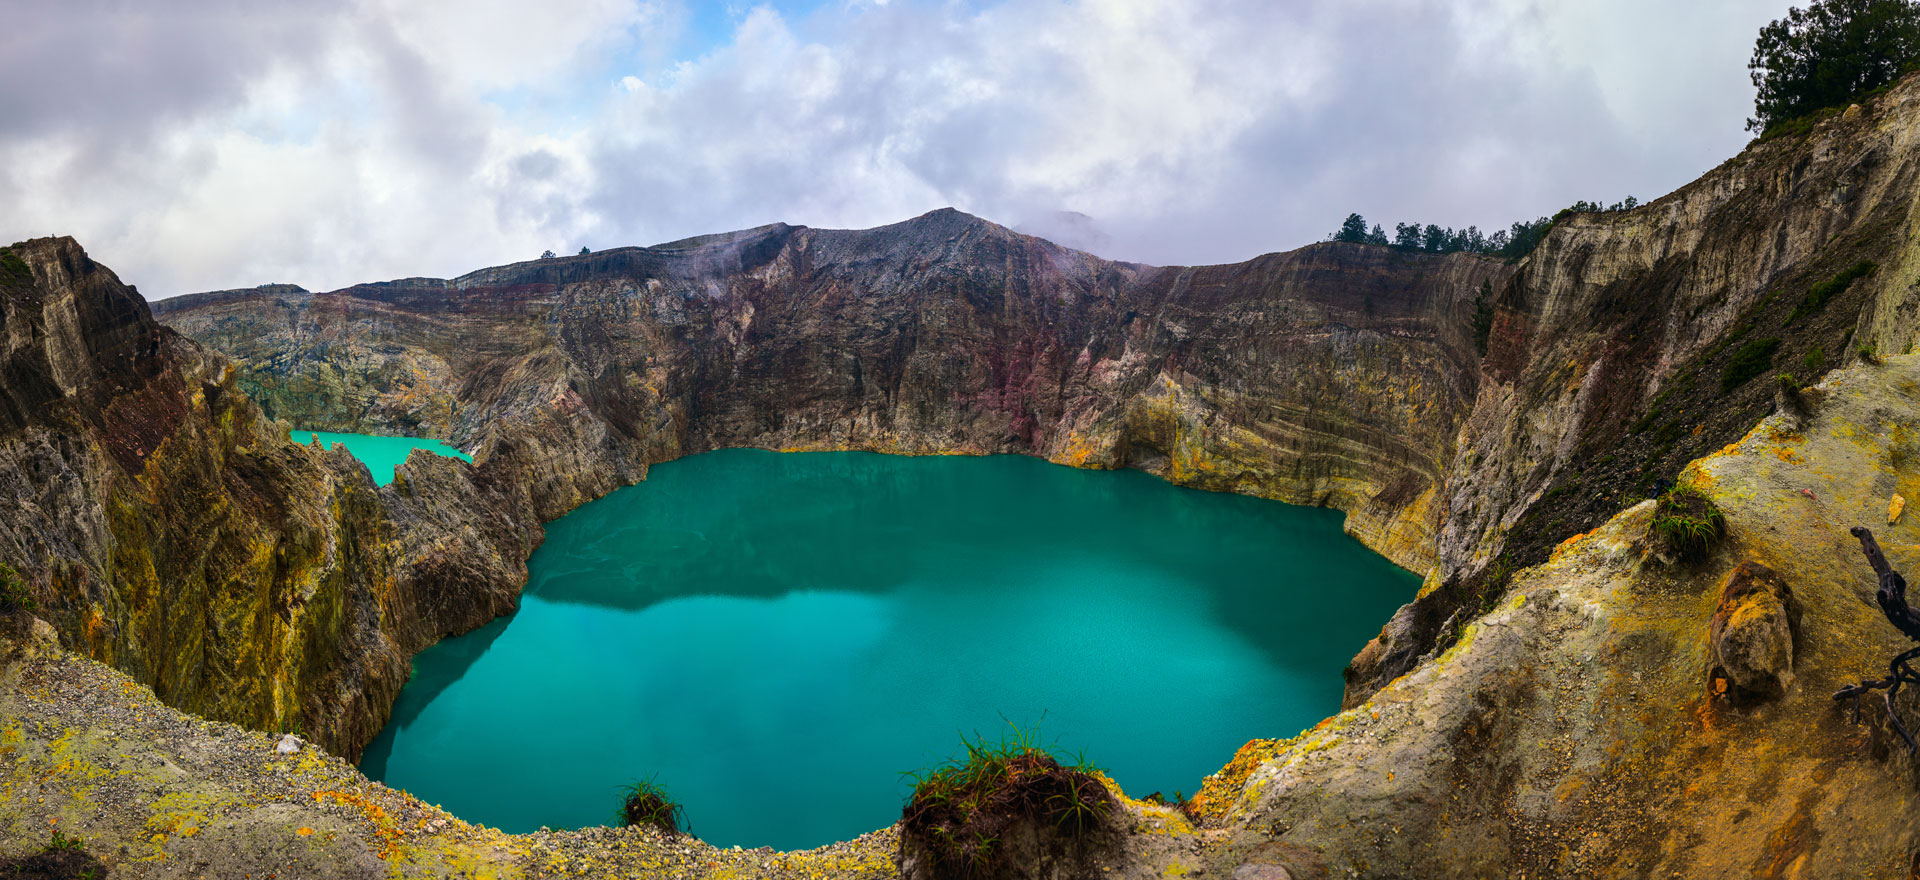 Mountain lake - Indonesia Holidays and Tours